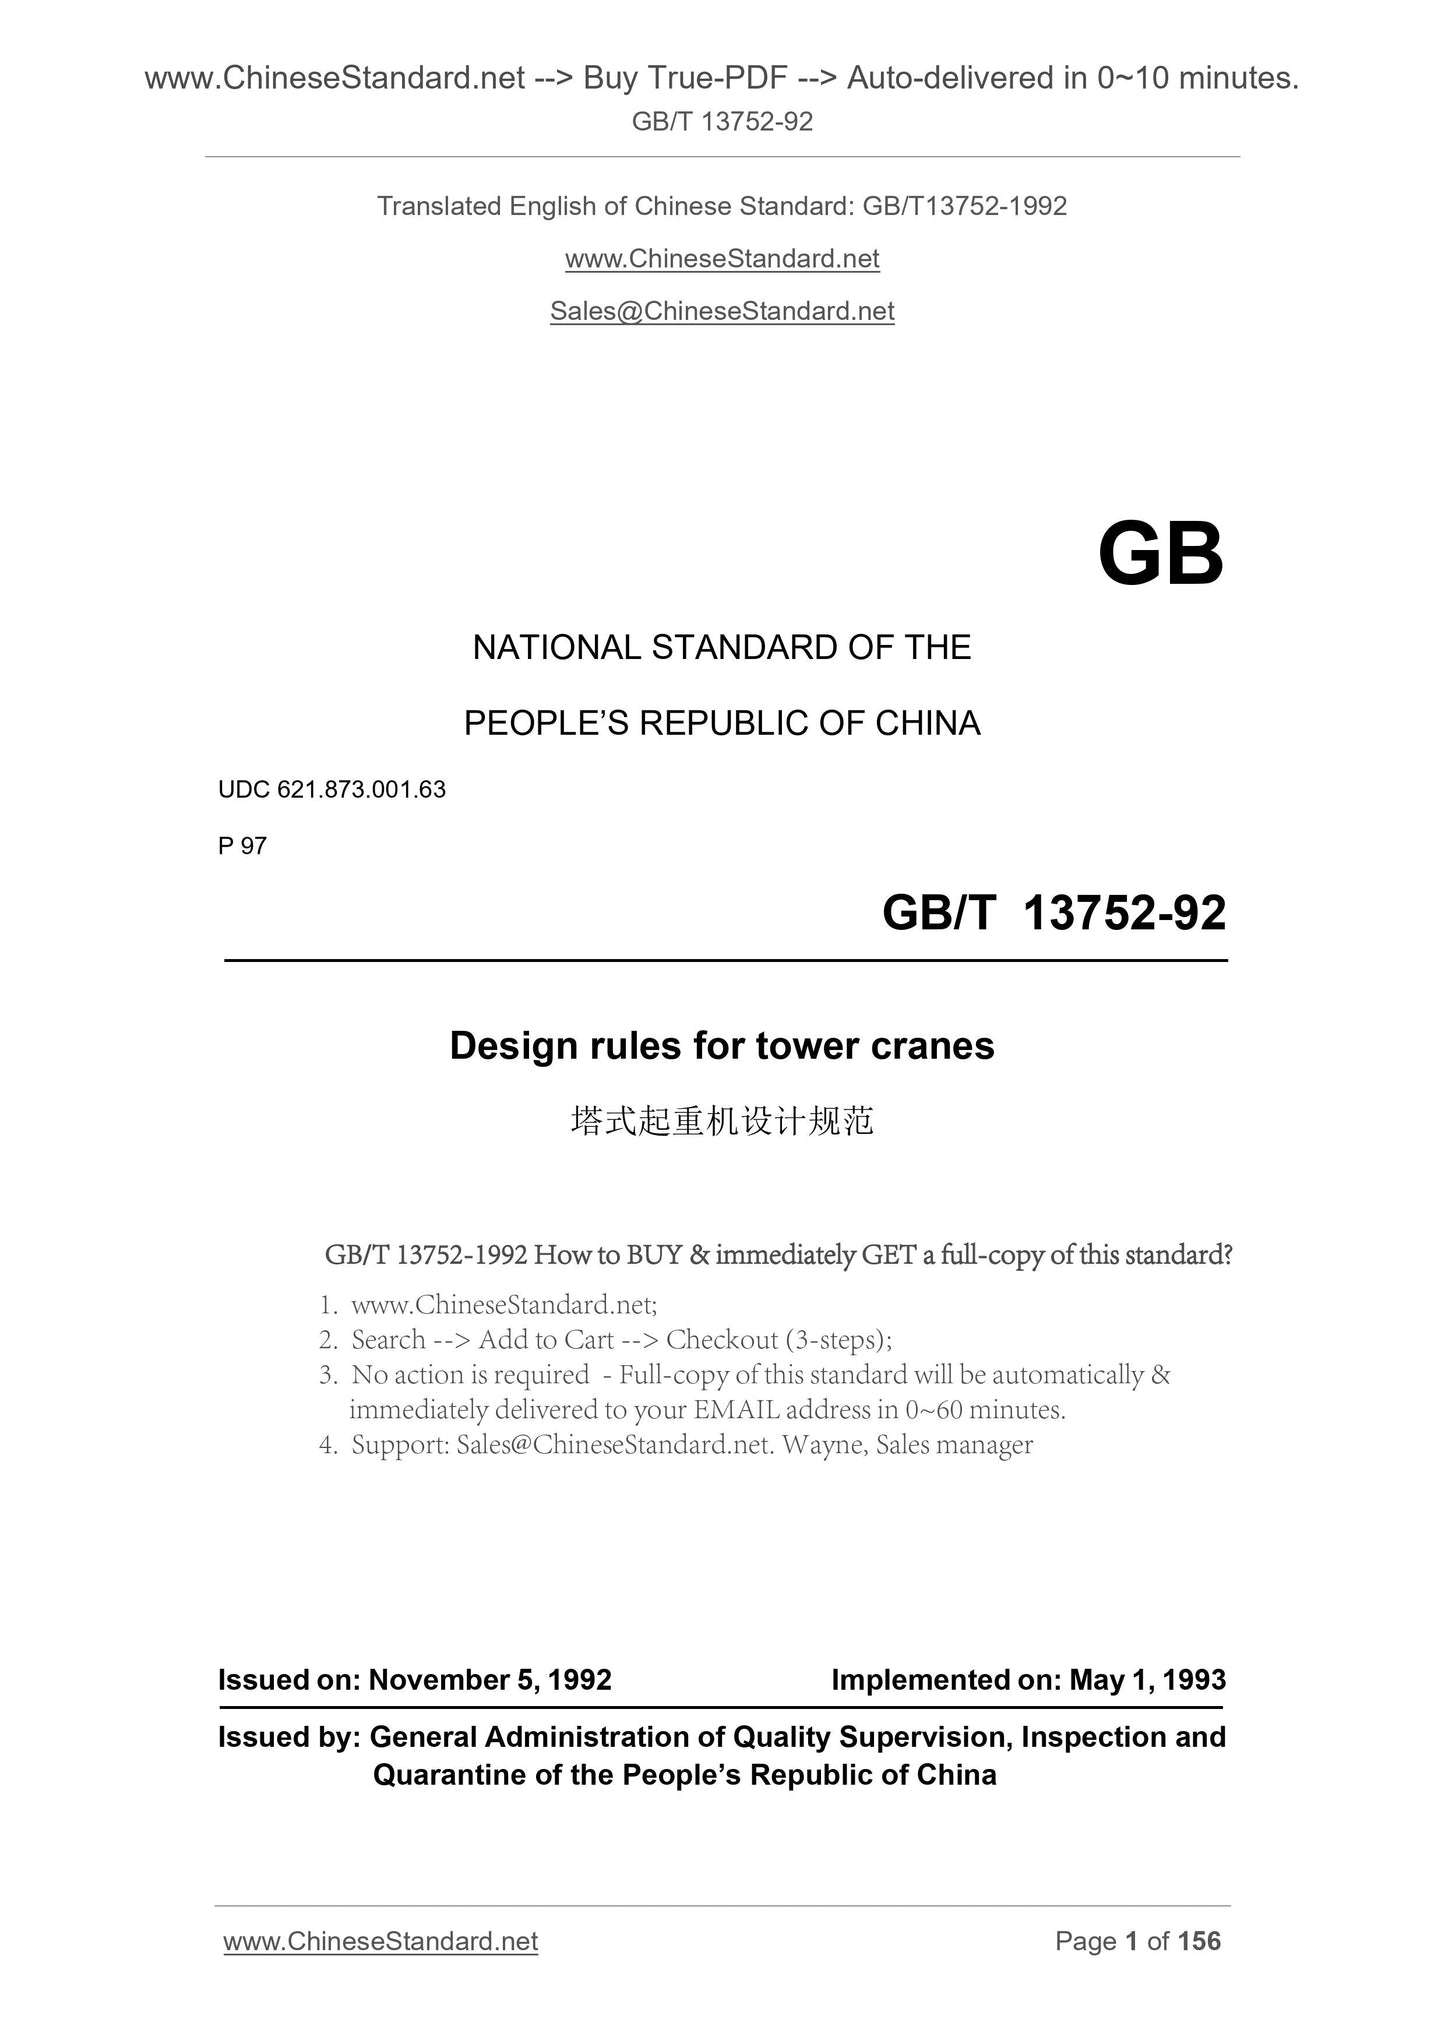 GB/T 13752-1992 Page 1